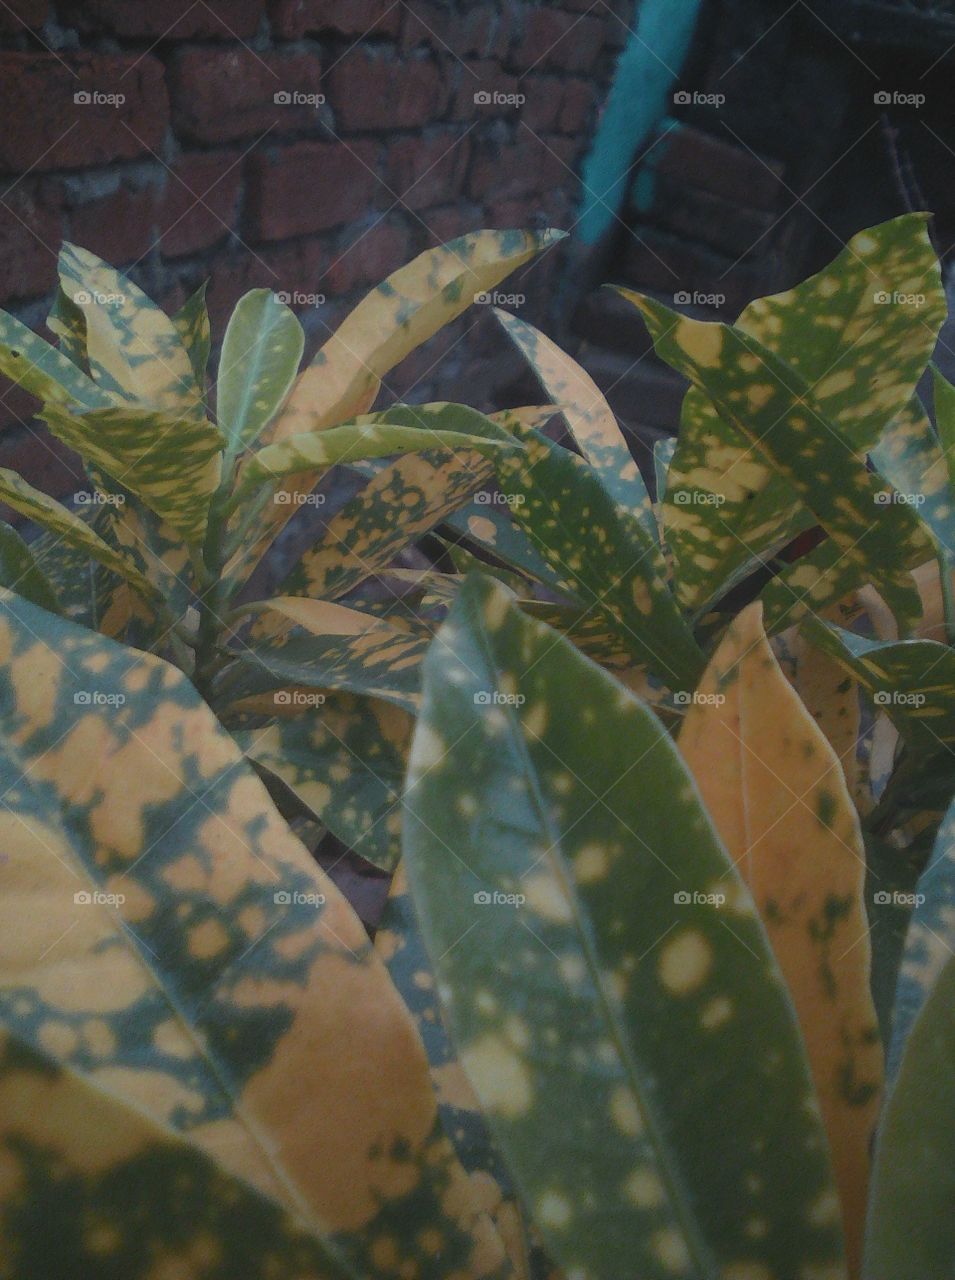 unedited pic of green plant leaves with yellow spots